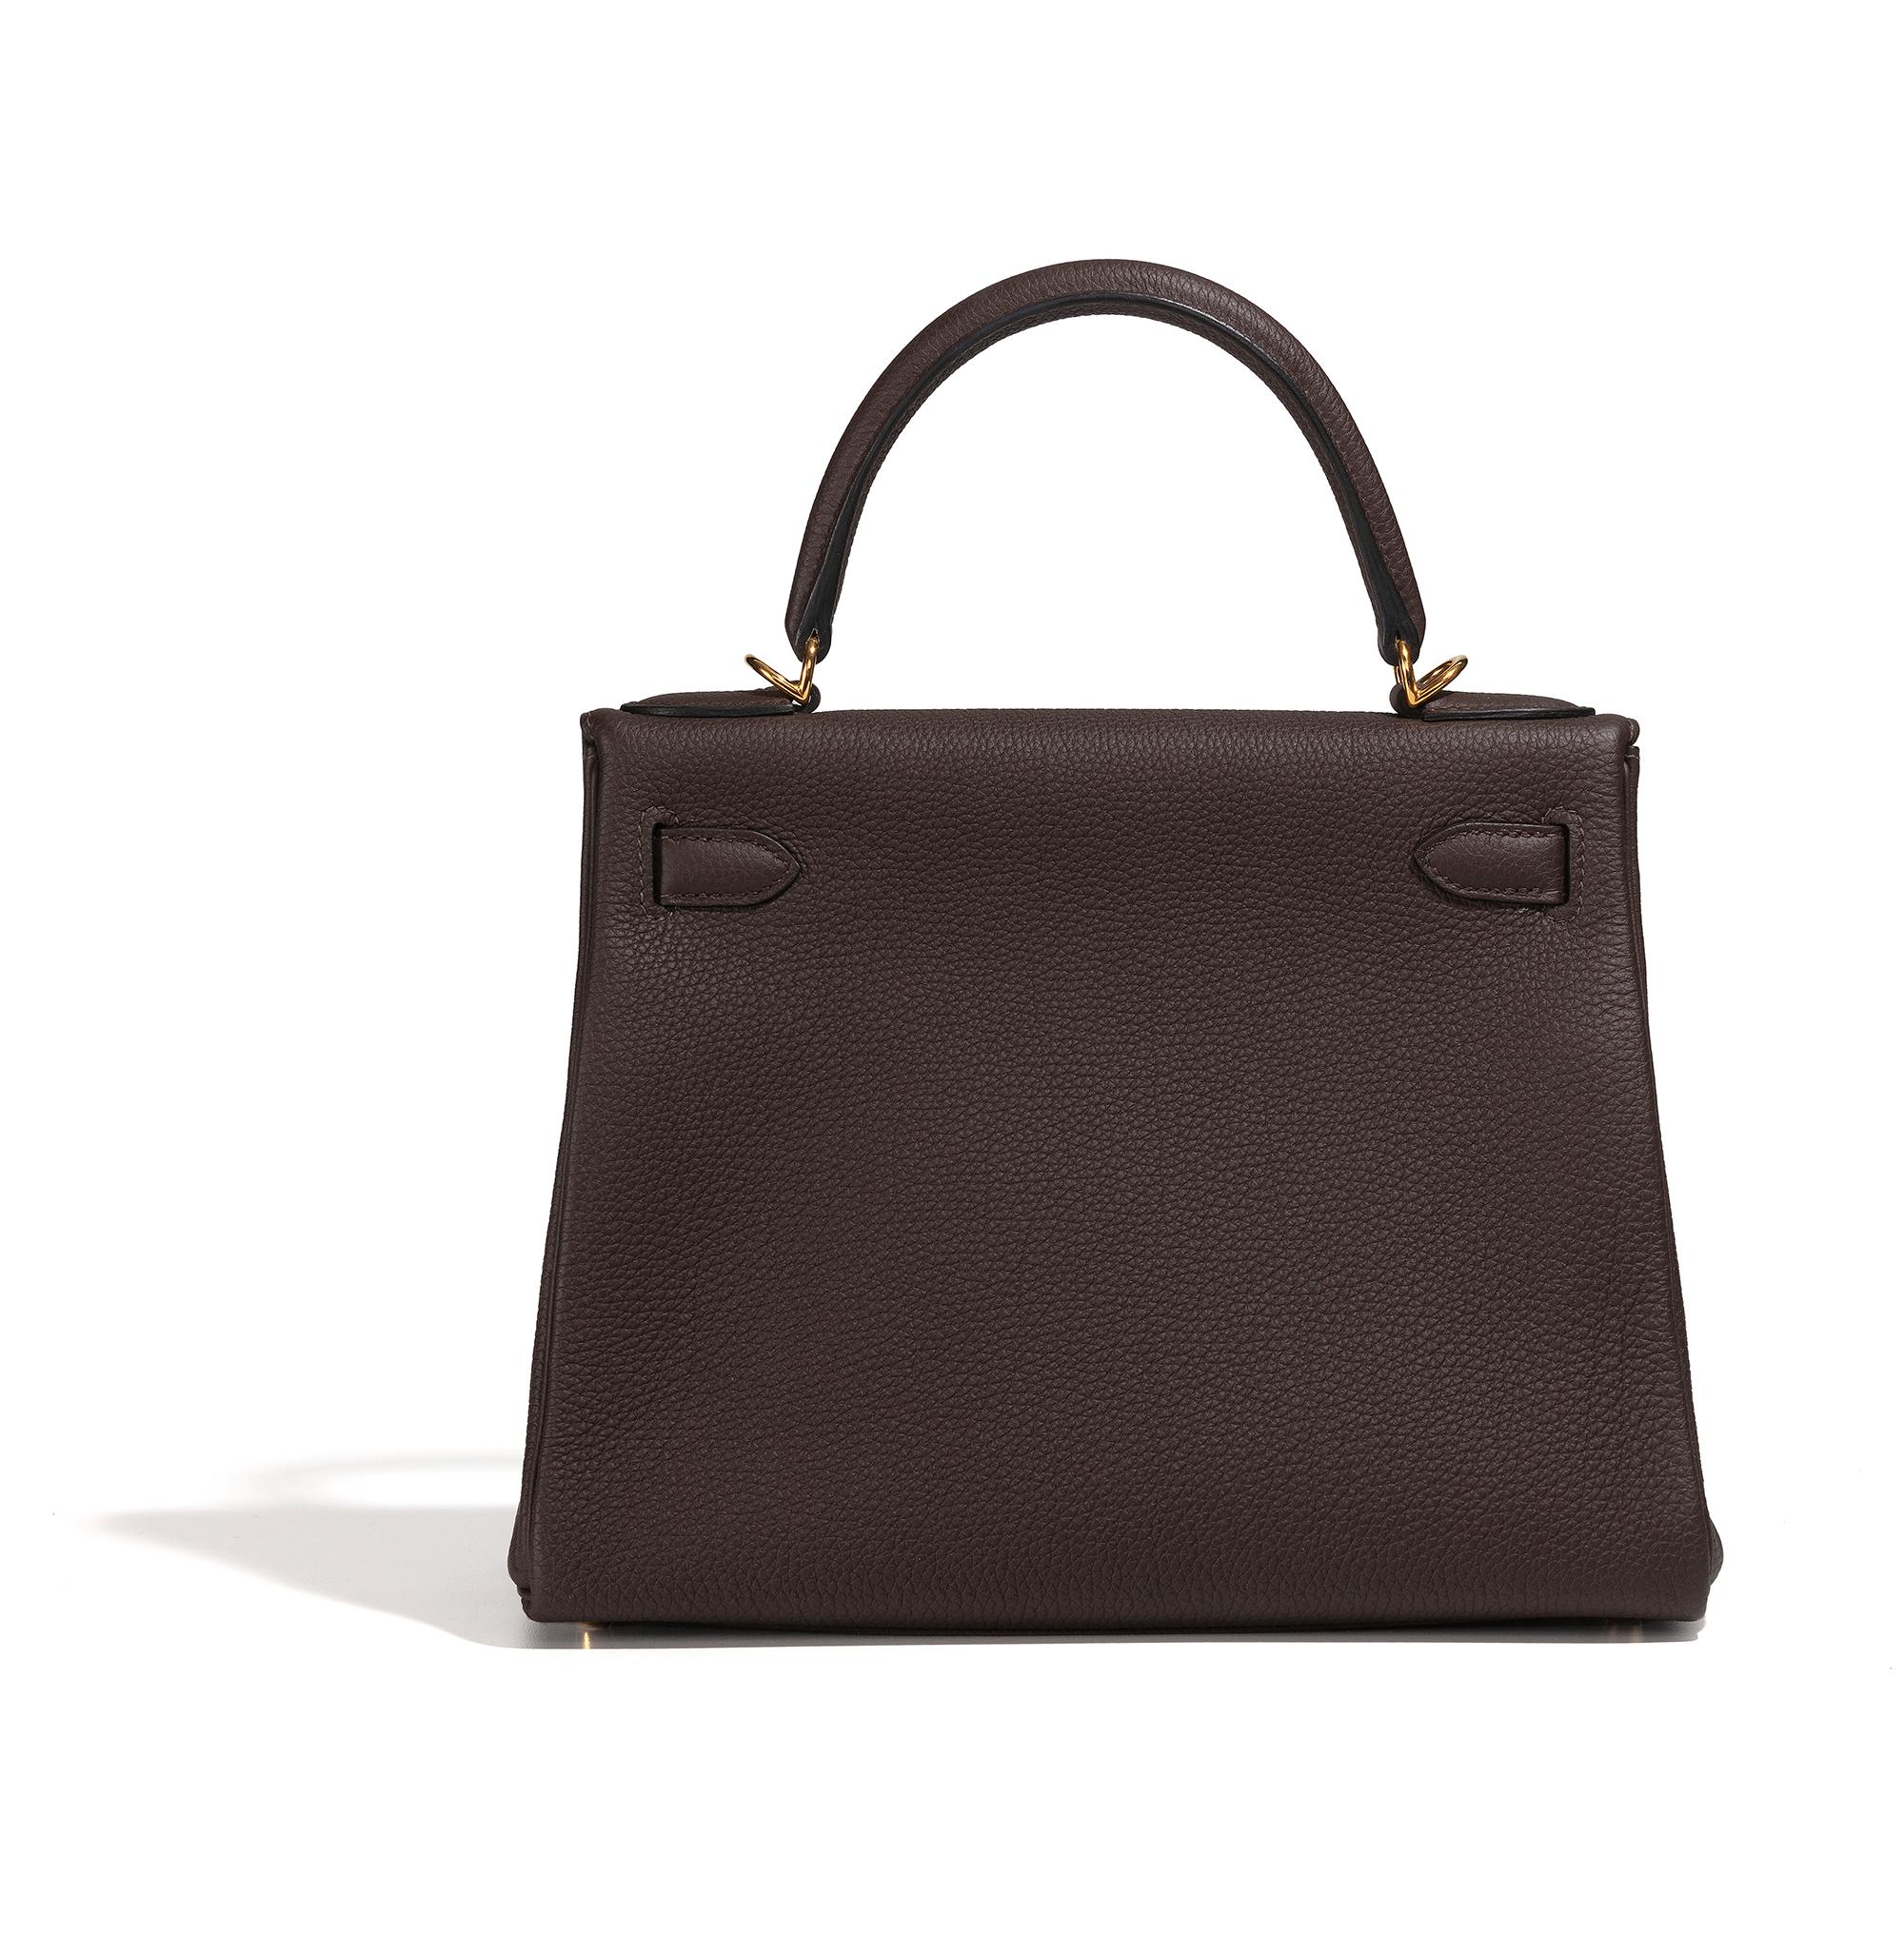 A true testament to the quality of the house's craftsmanship, the Kelly 28 Hermès bag was manufactured in 2021 with a 